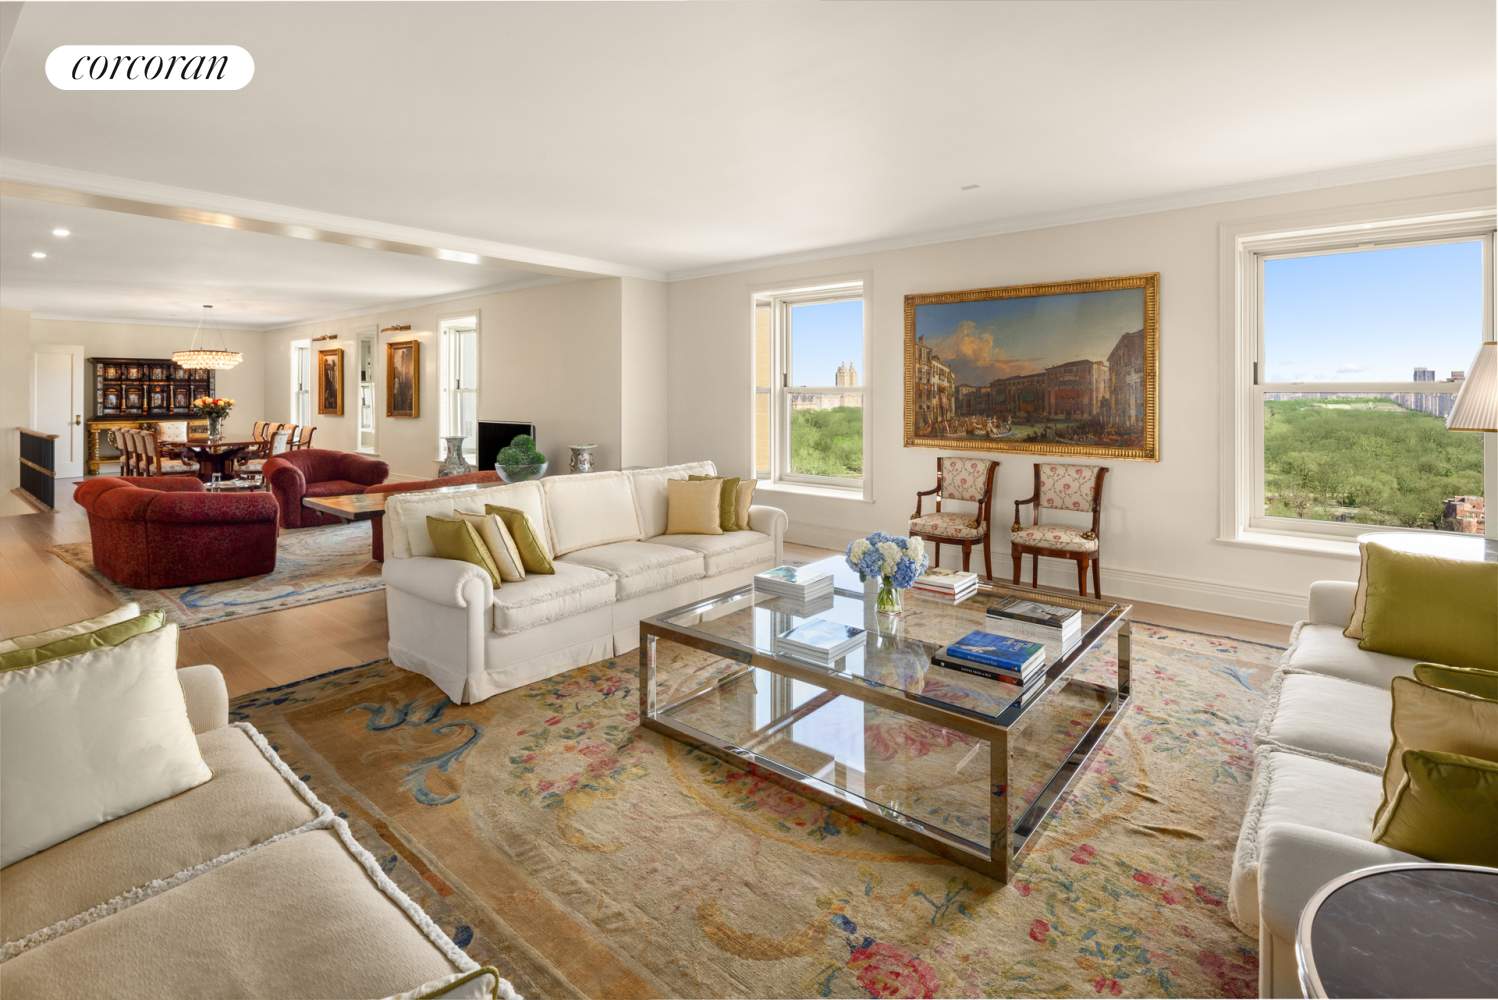 1 Central Park 1507/1607, Central Park South, Midtown West, NYC - 5 Bedrooms  
5.5 Bathrooms  
12 Rooms - 